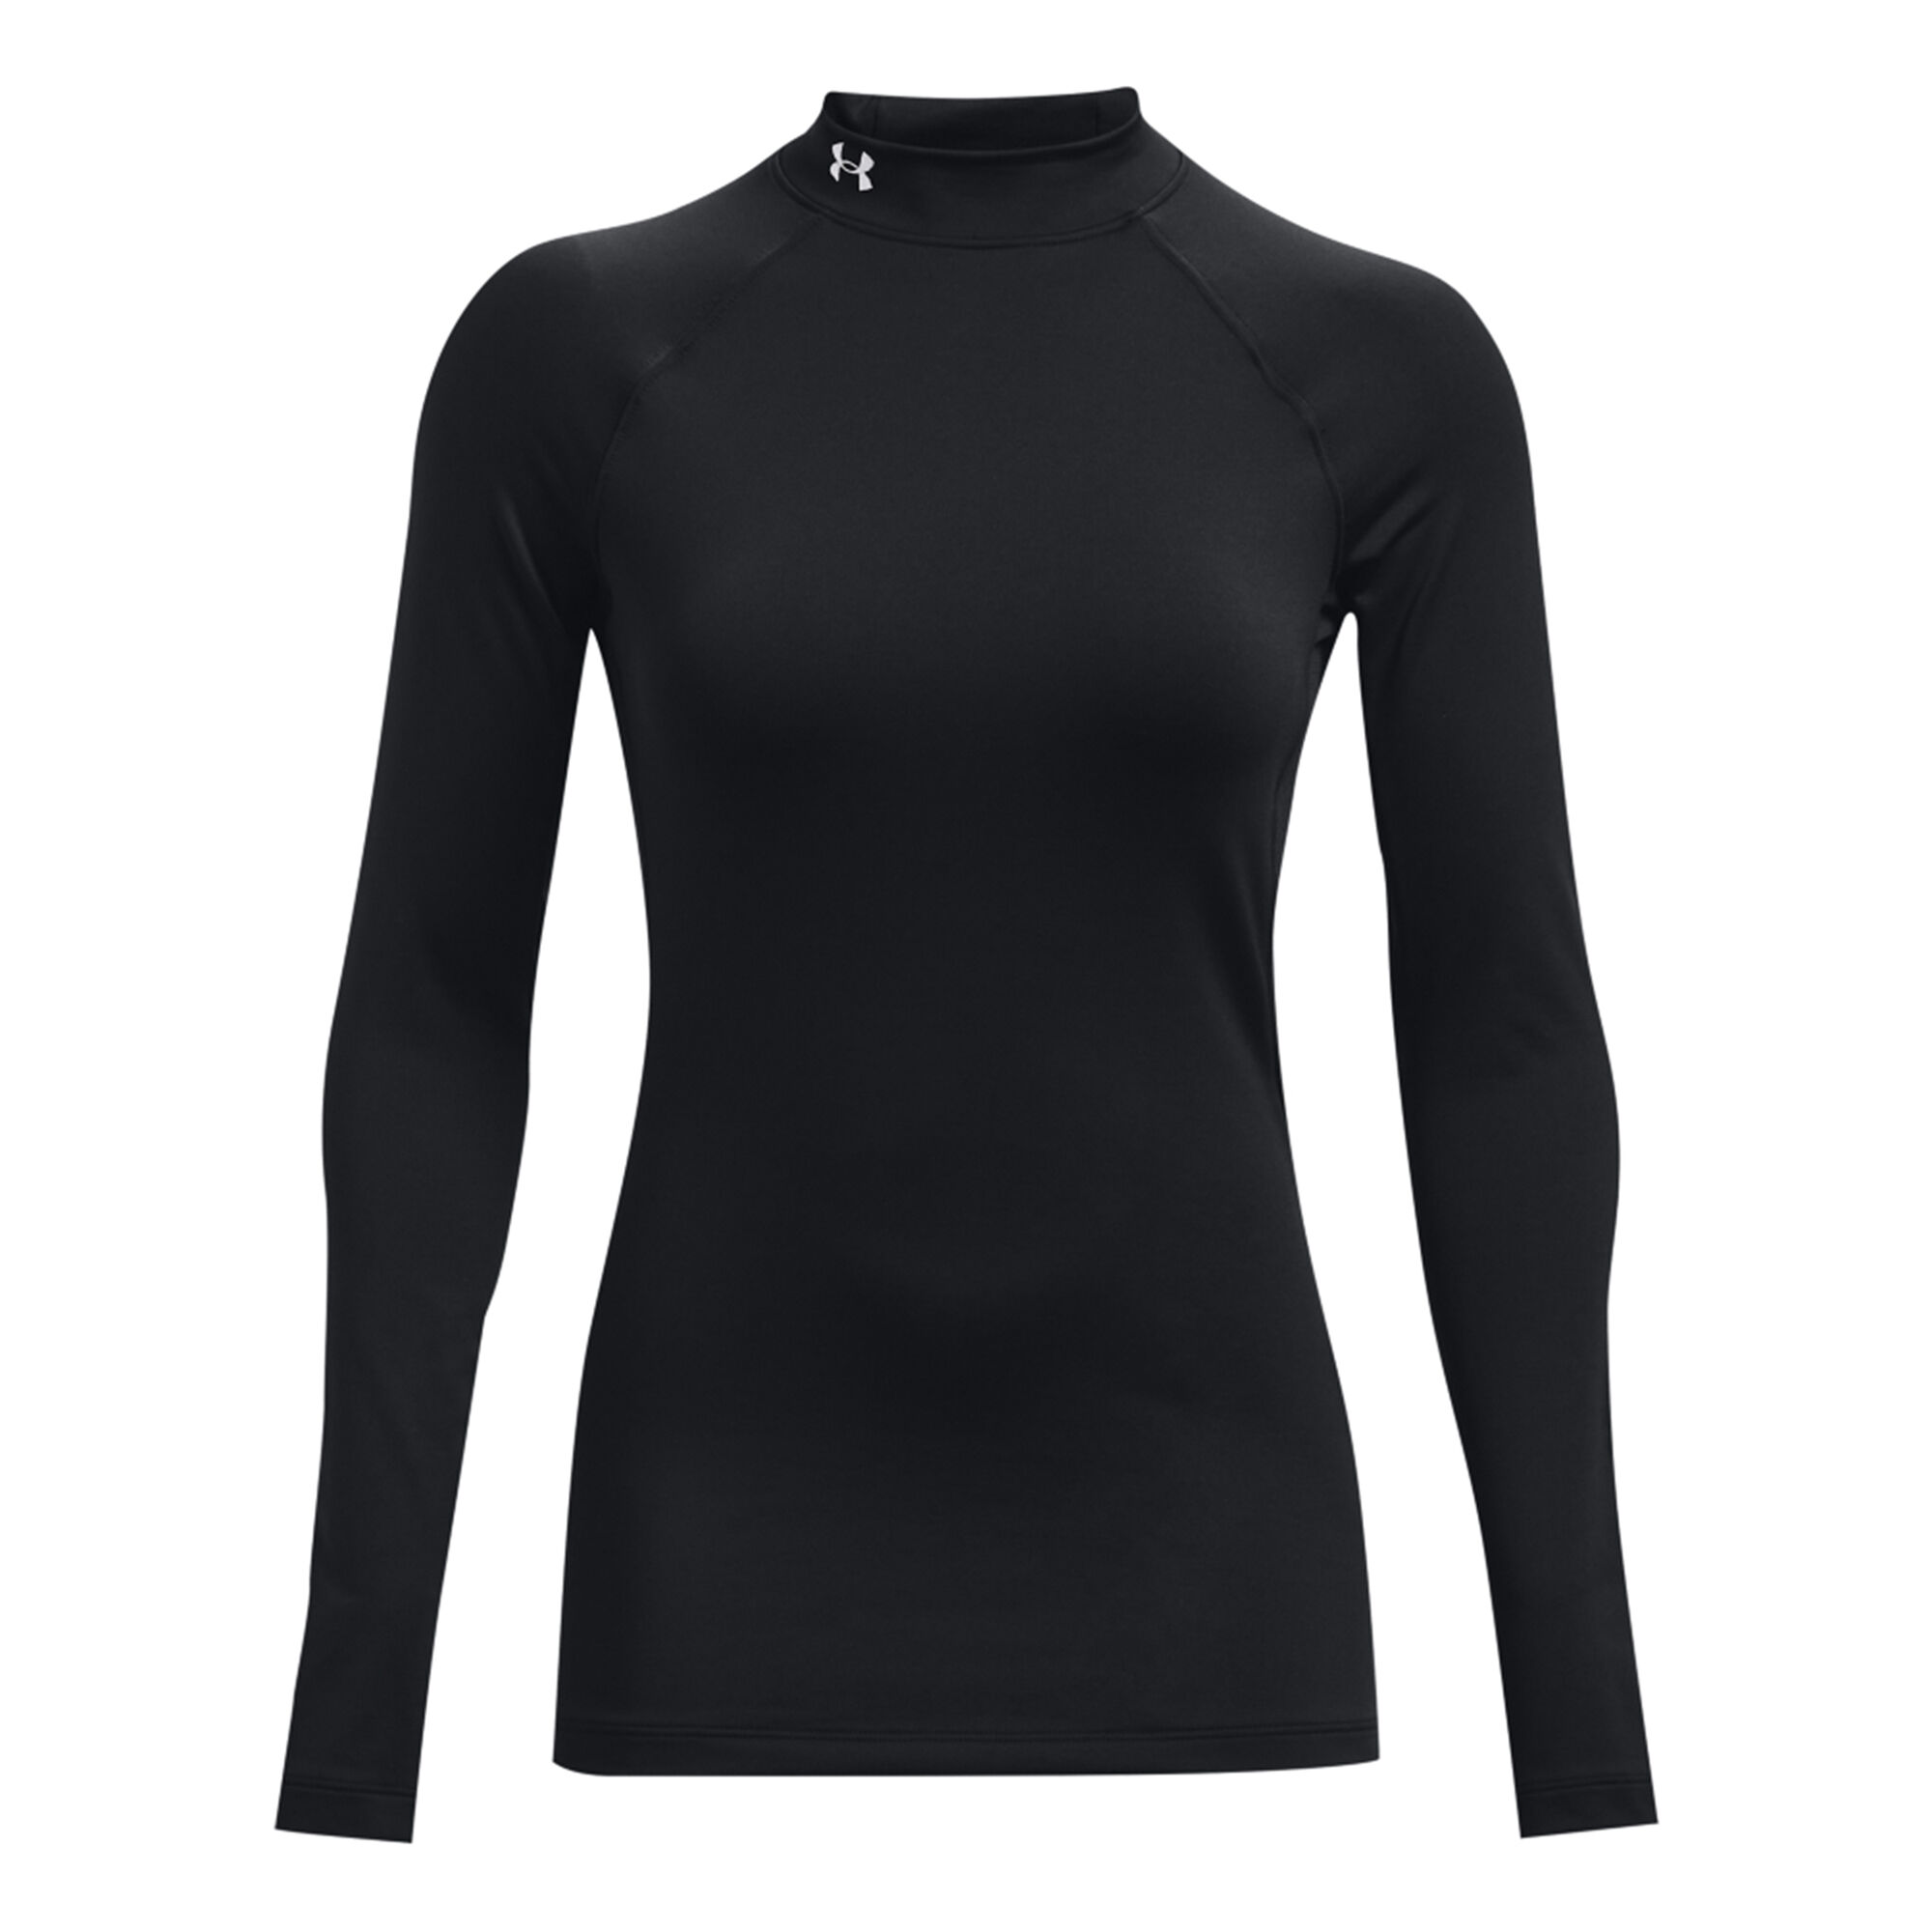 UNDER ARMOUR coldgear womens mock neck long sleeve pull over